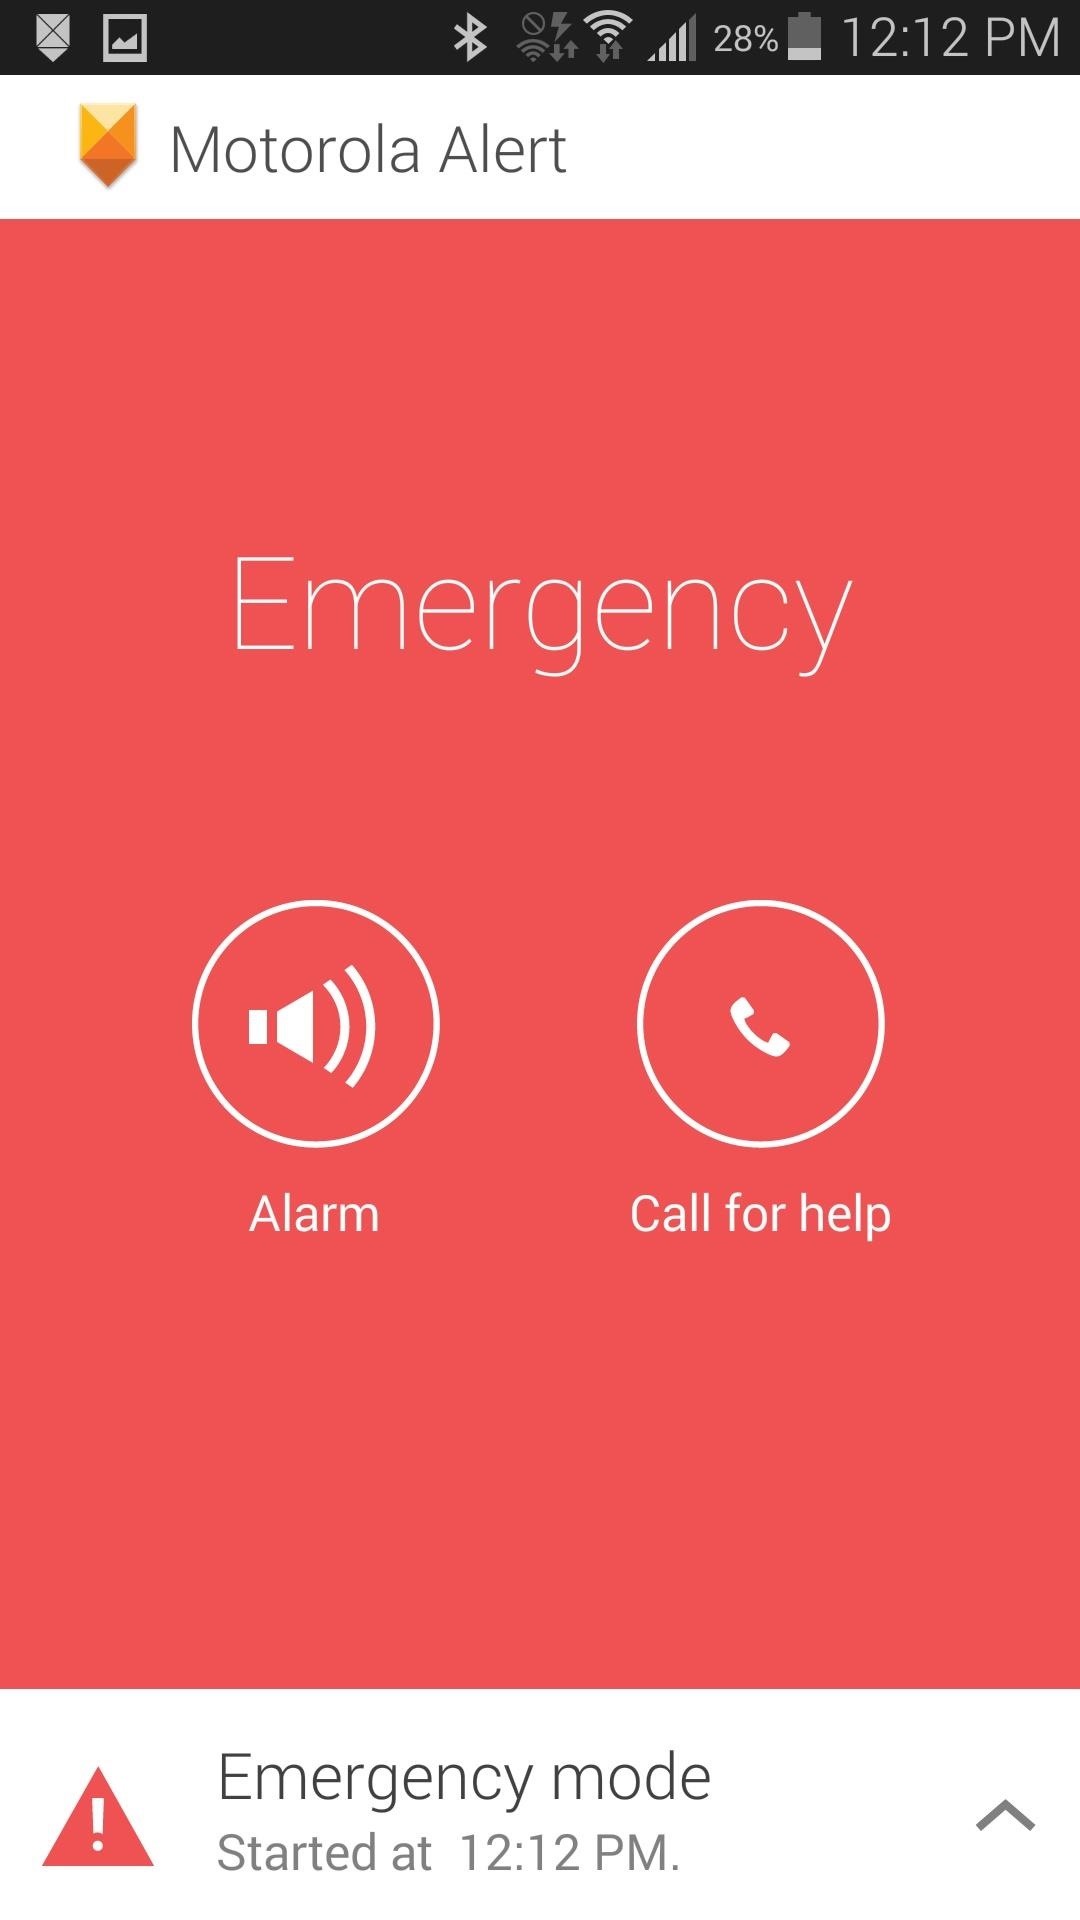 Turn Your Android Phone into a Personal Distress Beacon with Motorola's "Exclusive" Alert App